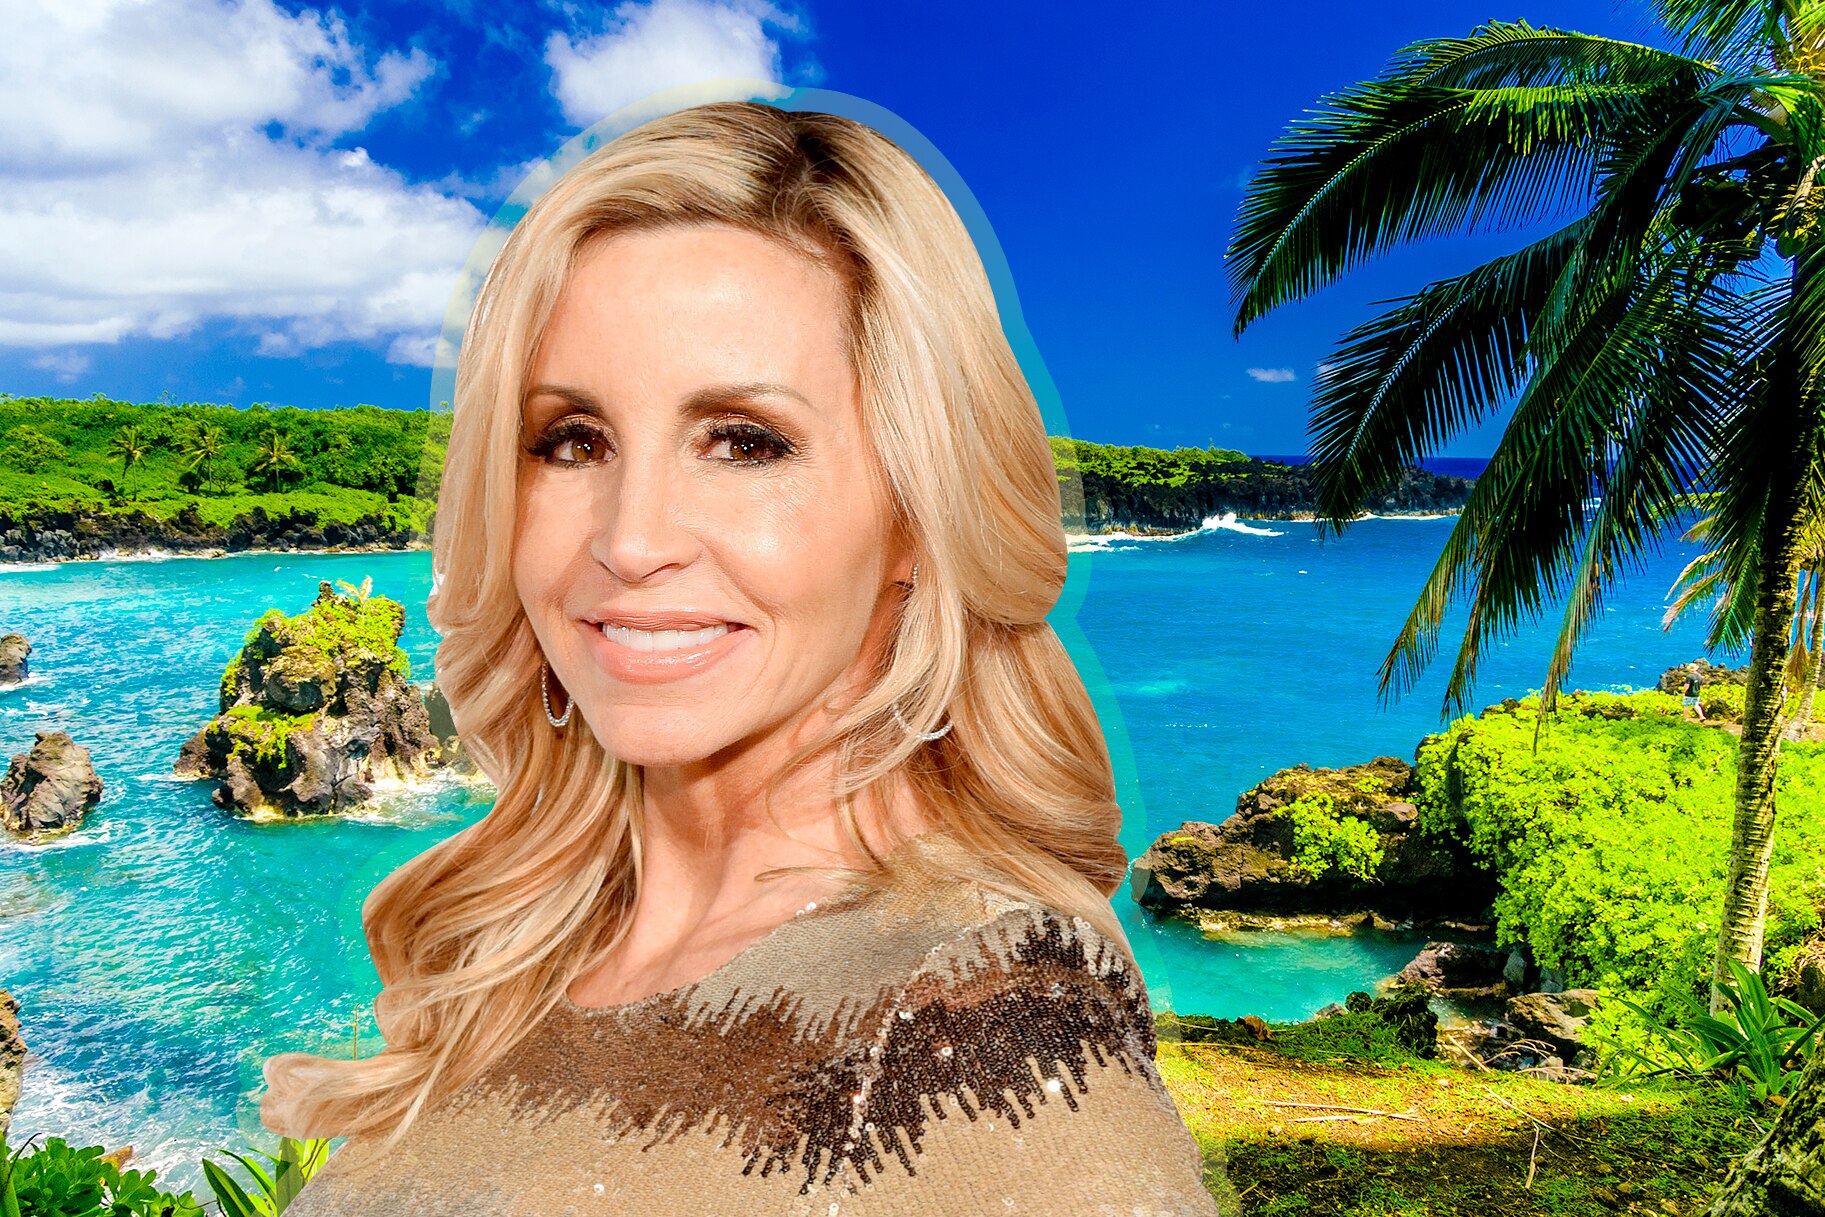 Camille Grammer has a relatable affliction: She cannot get enough Hawaii in...